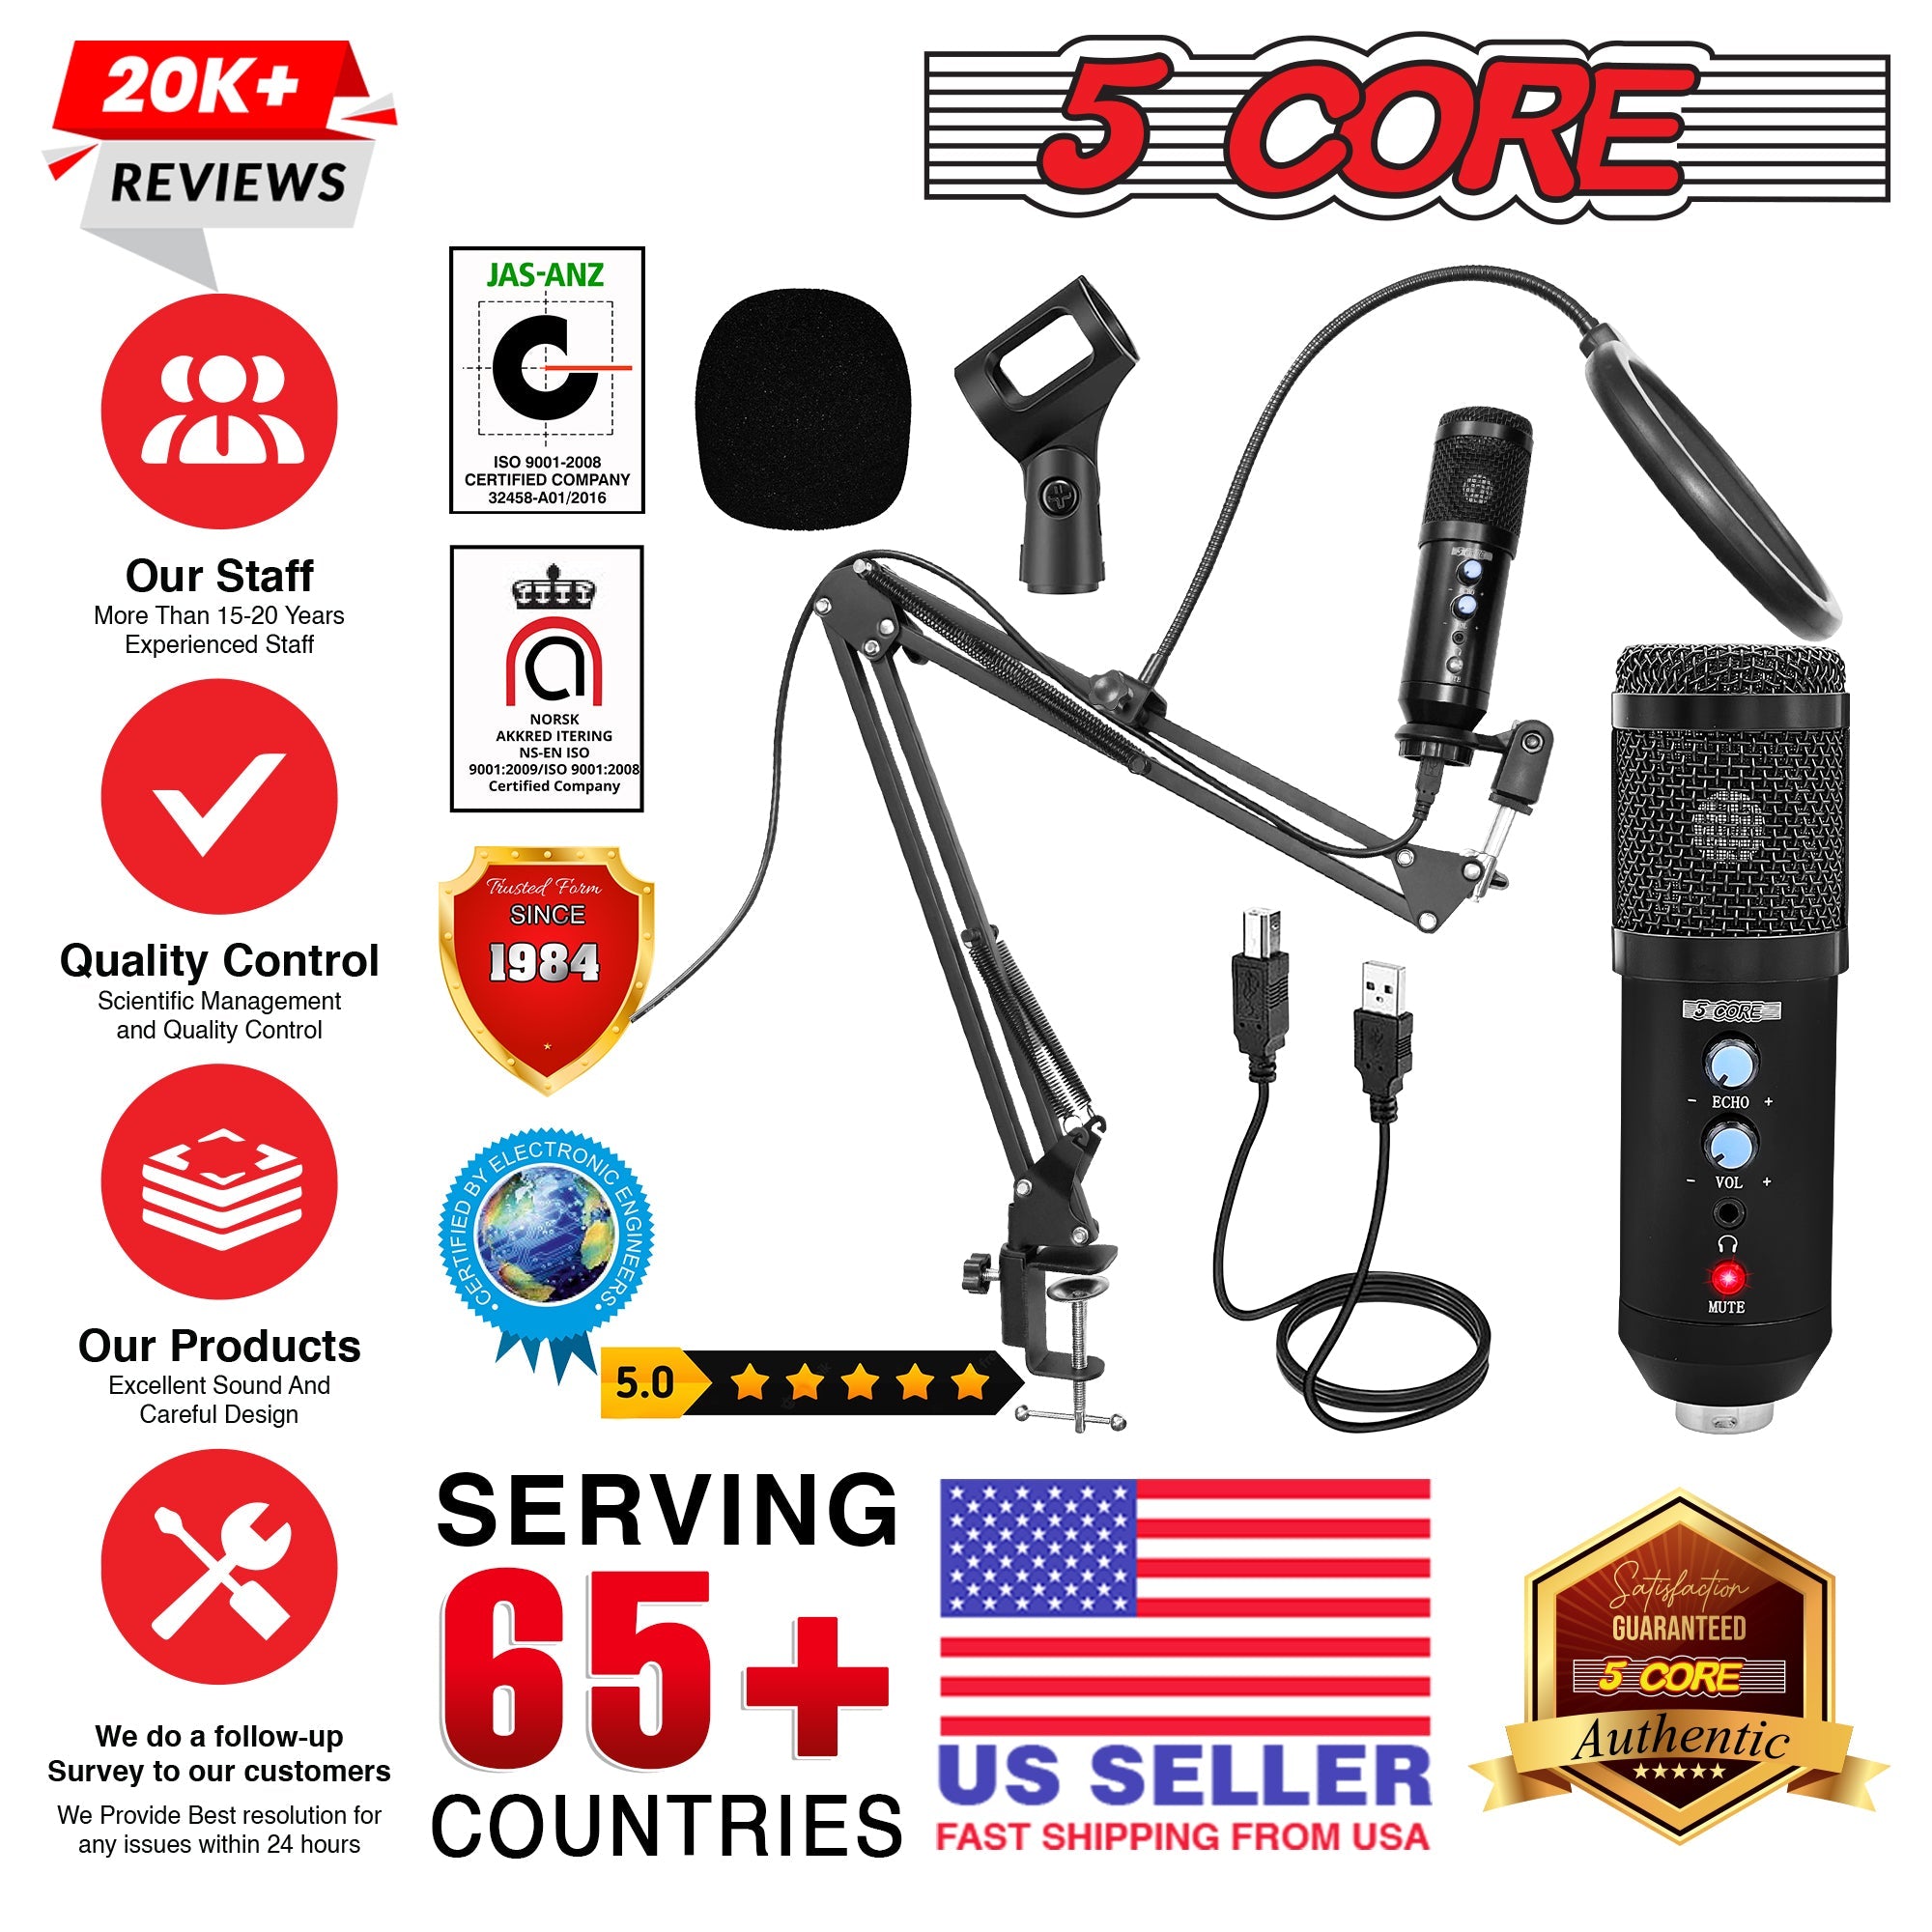 5 Core Podcast Microphone Bundle USB Condenser PC Mic Recording Studio Equipment Gaming Streaming